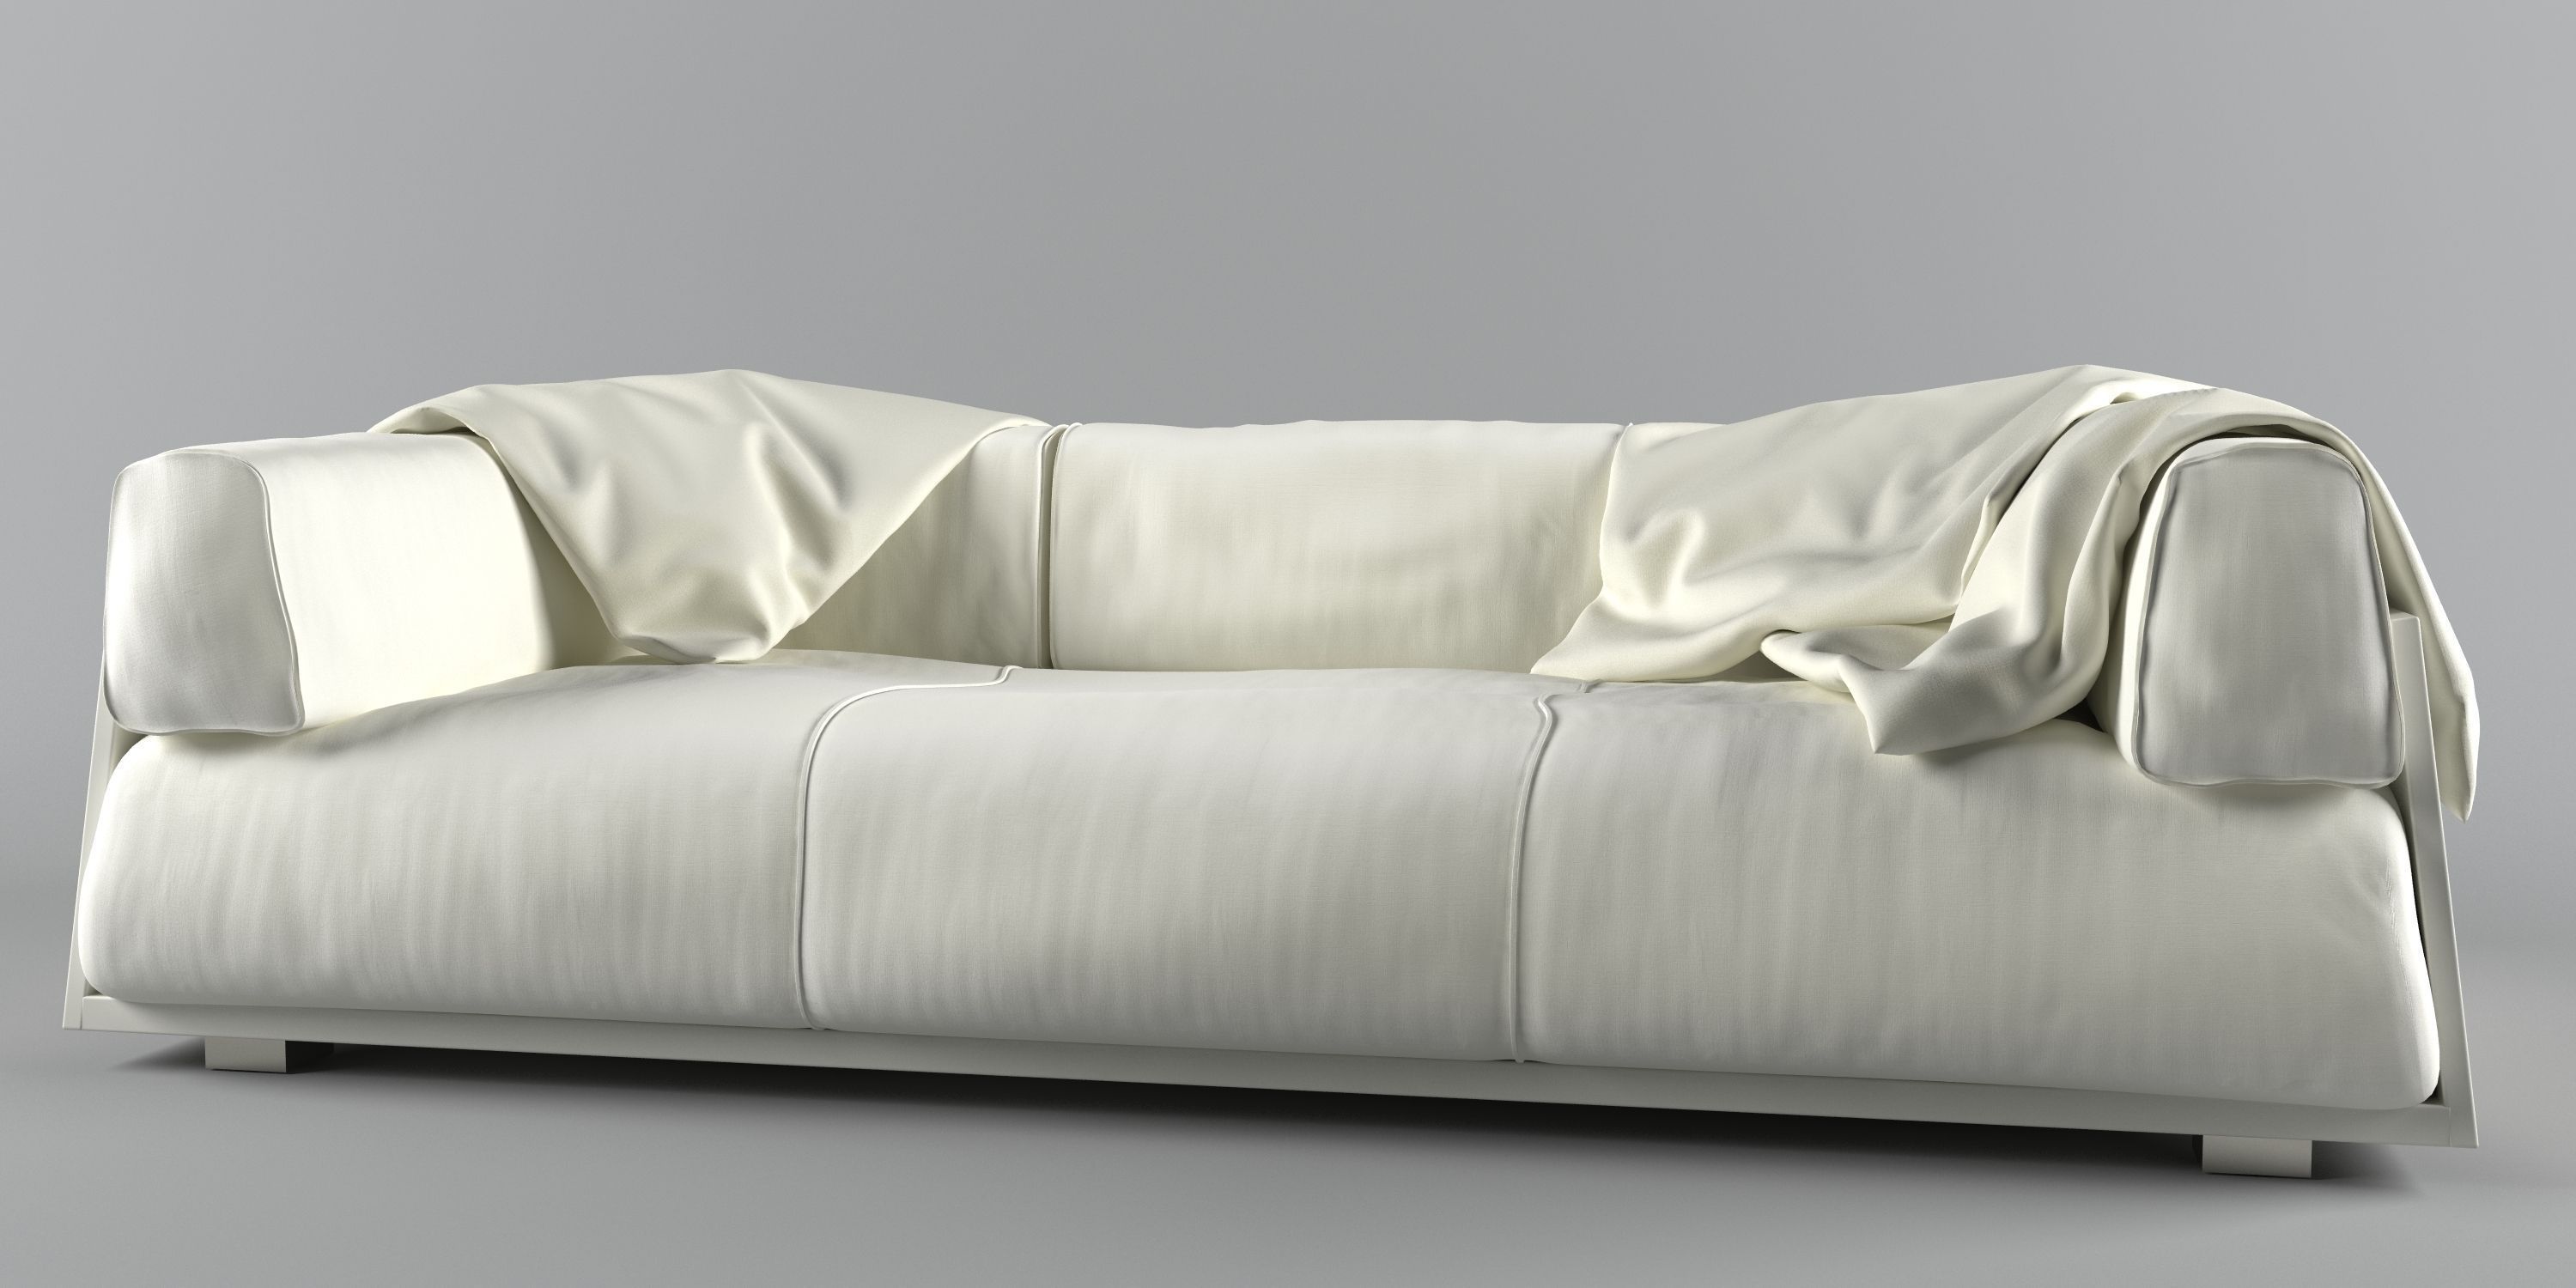 Beautiful Soft Sofa 24 For Sofas And Couches Ideas With Soft Sofa Intended For Soft Sofas (Photo 9 of 10)